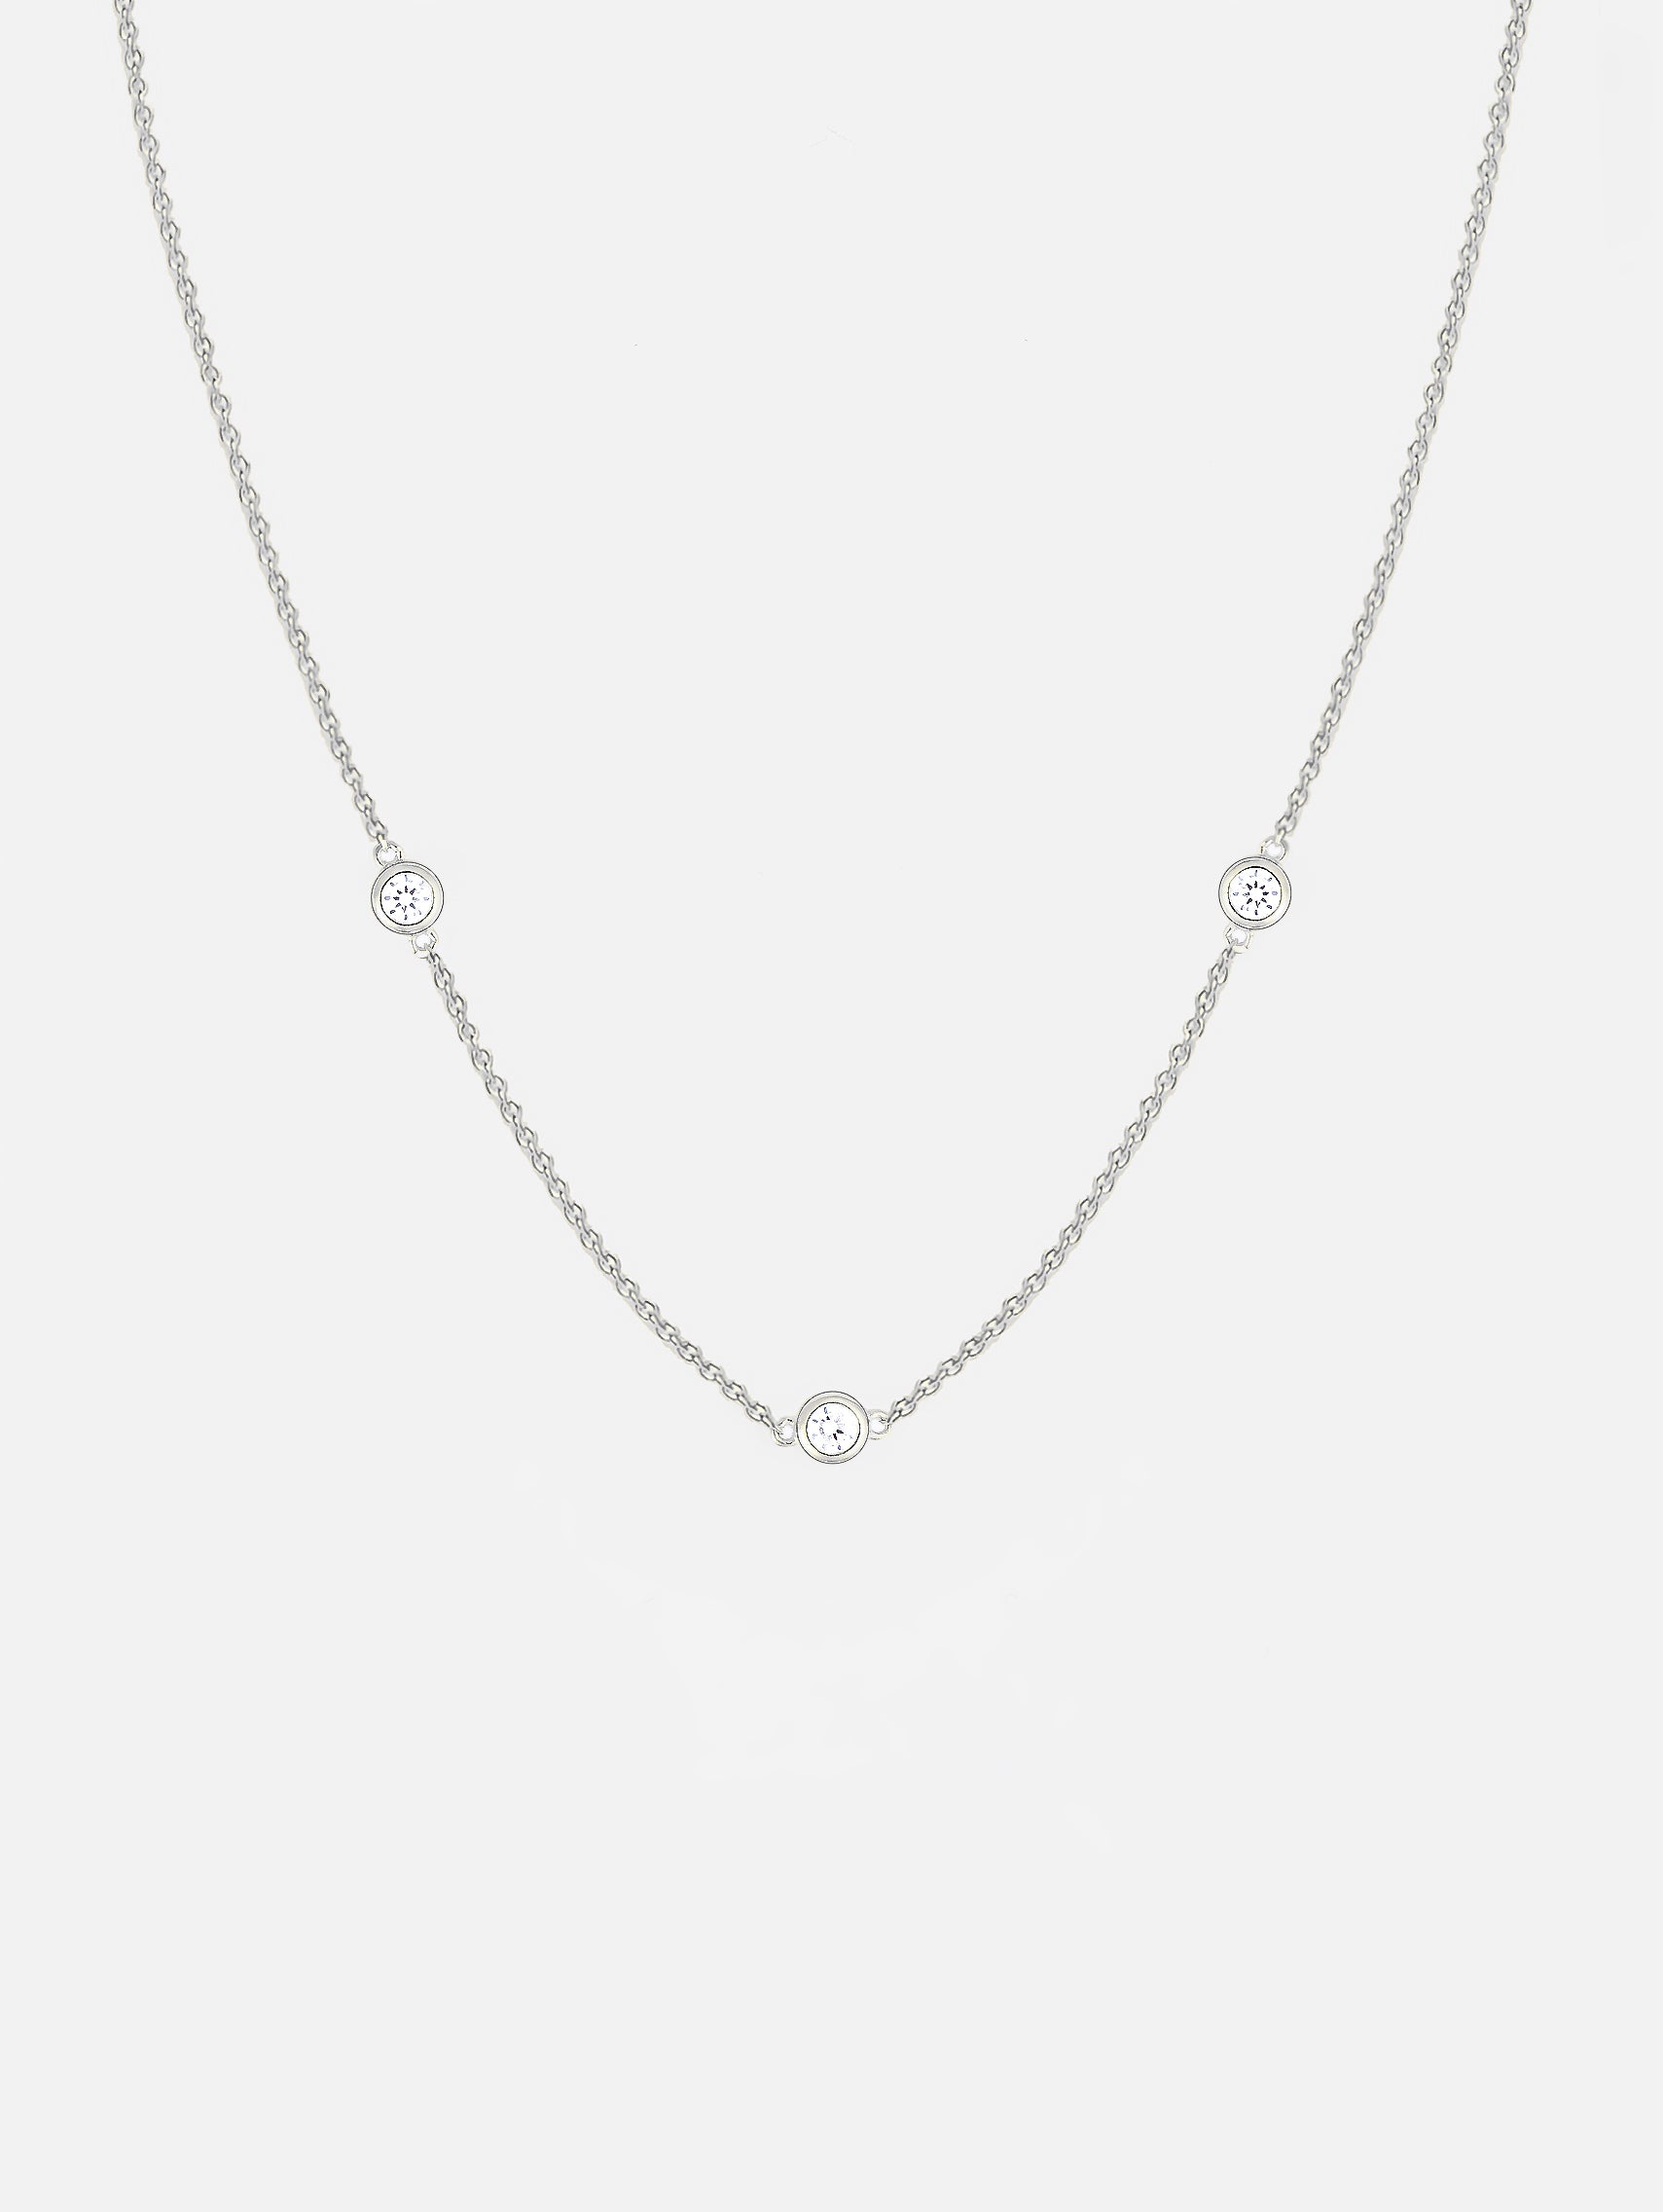 Silver Charm Necklace With Three Stones